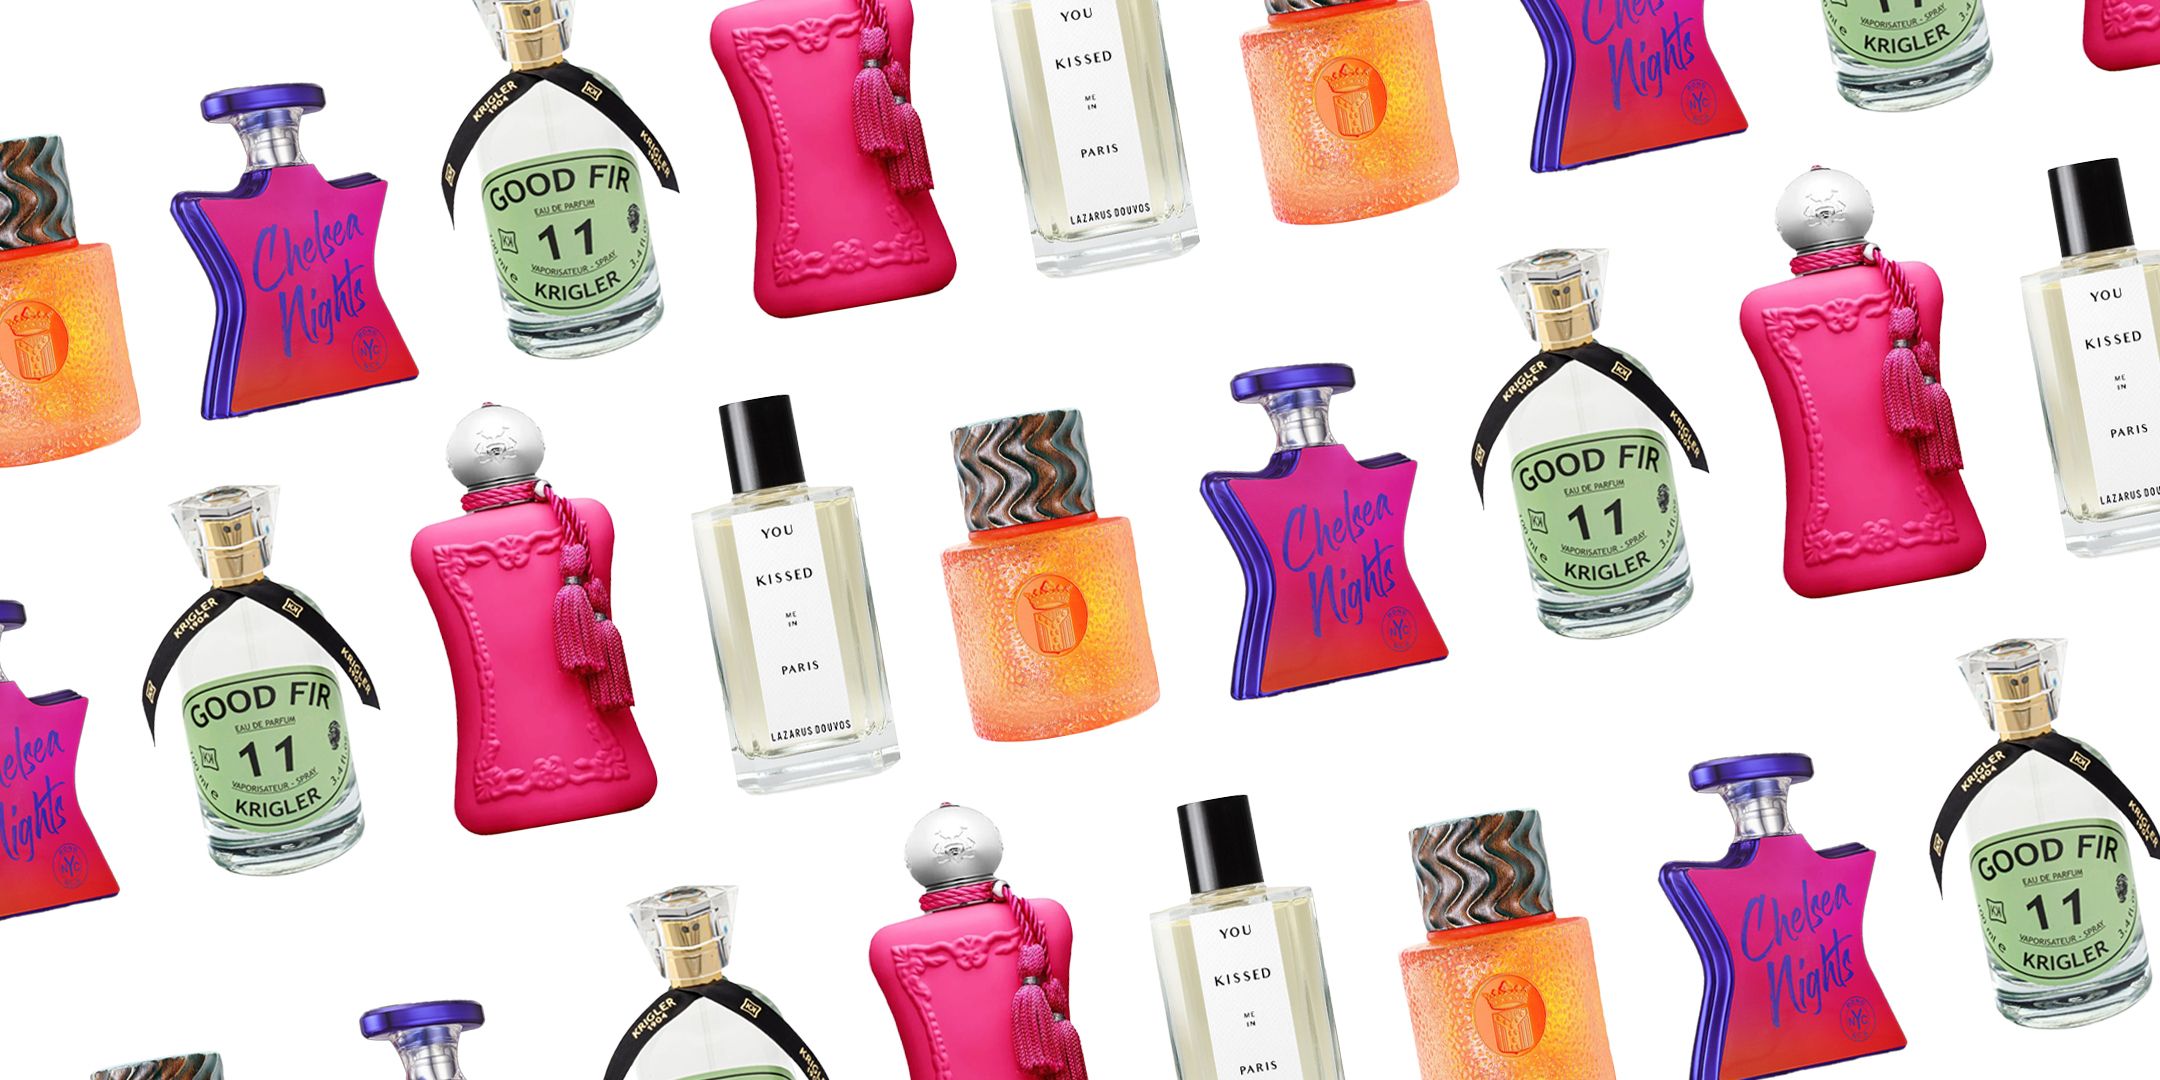 10 top female fragrances available in Laois Pharmacy this year